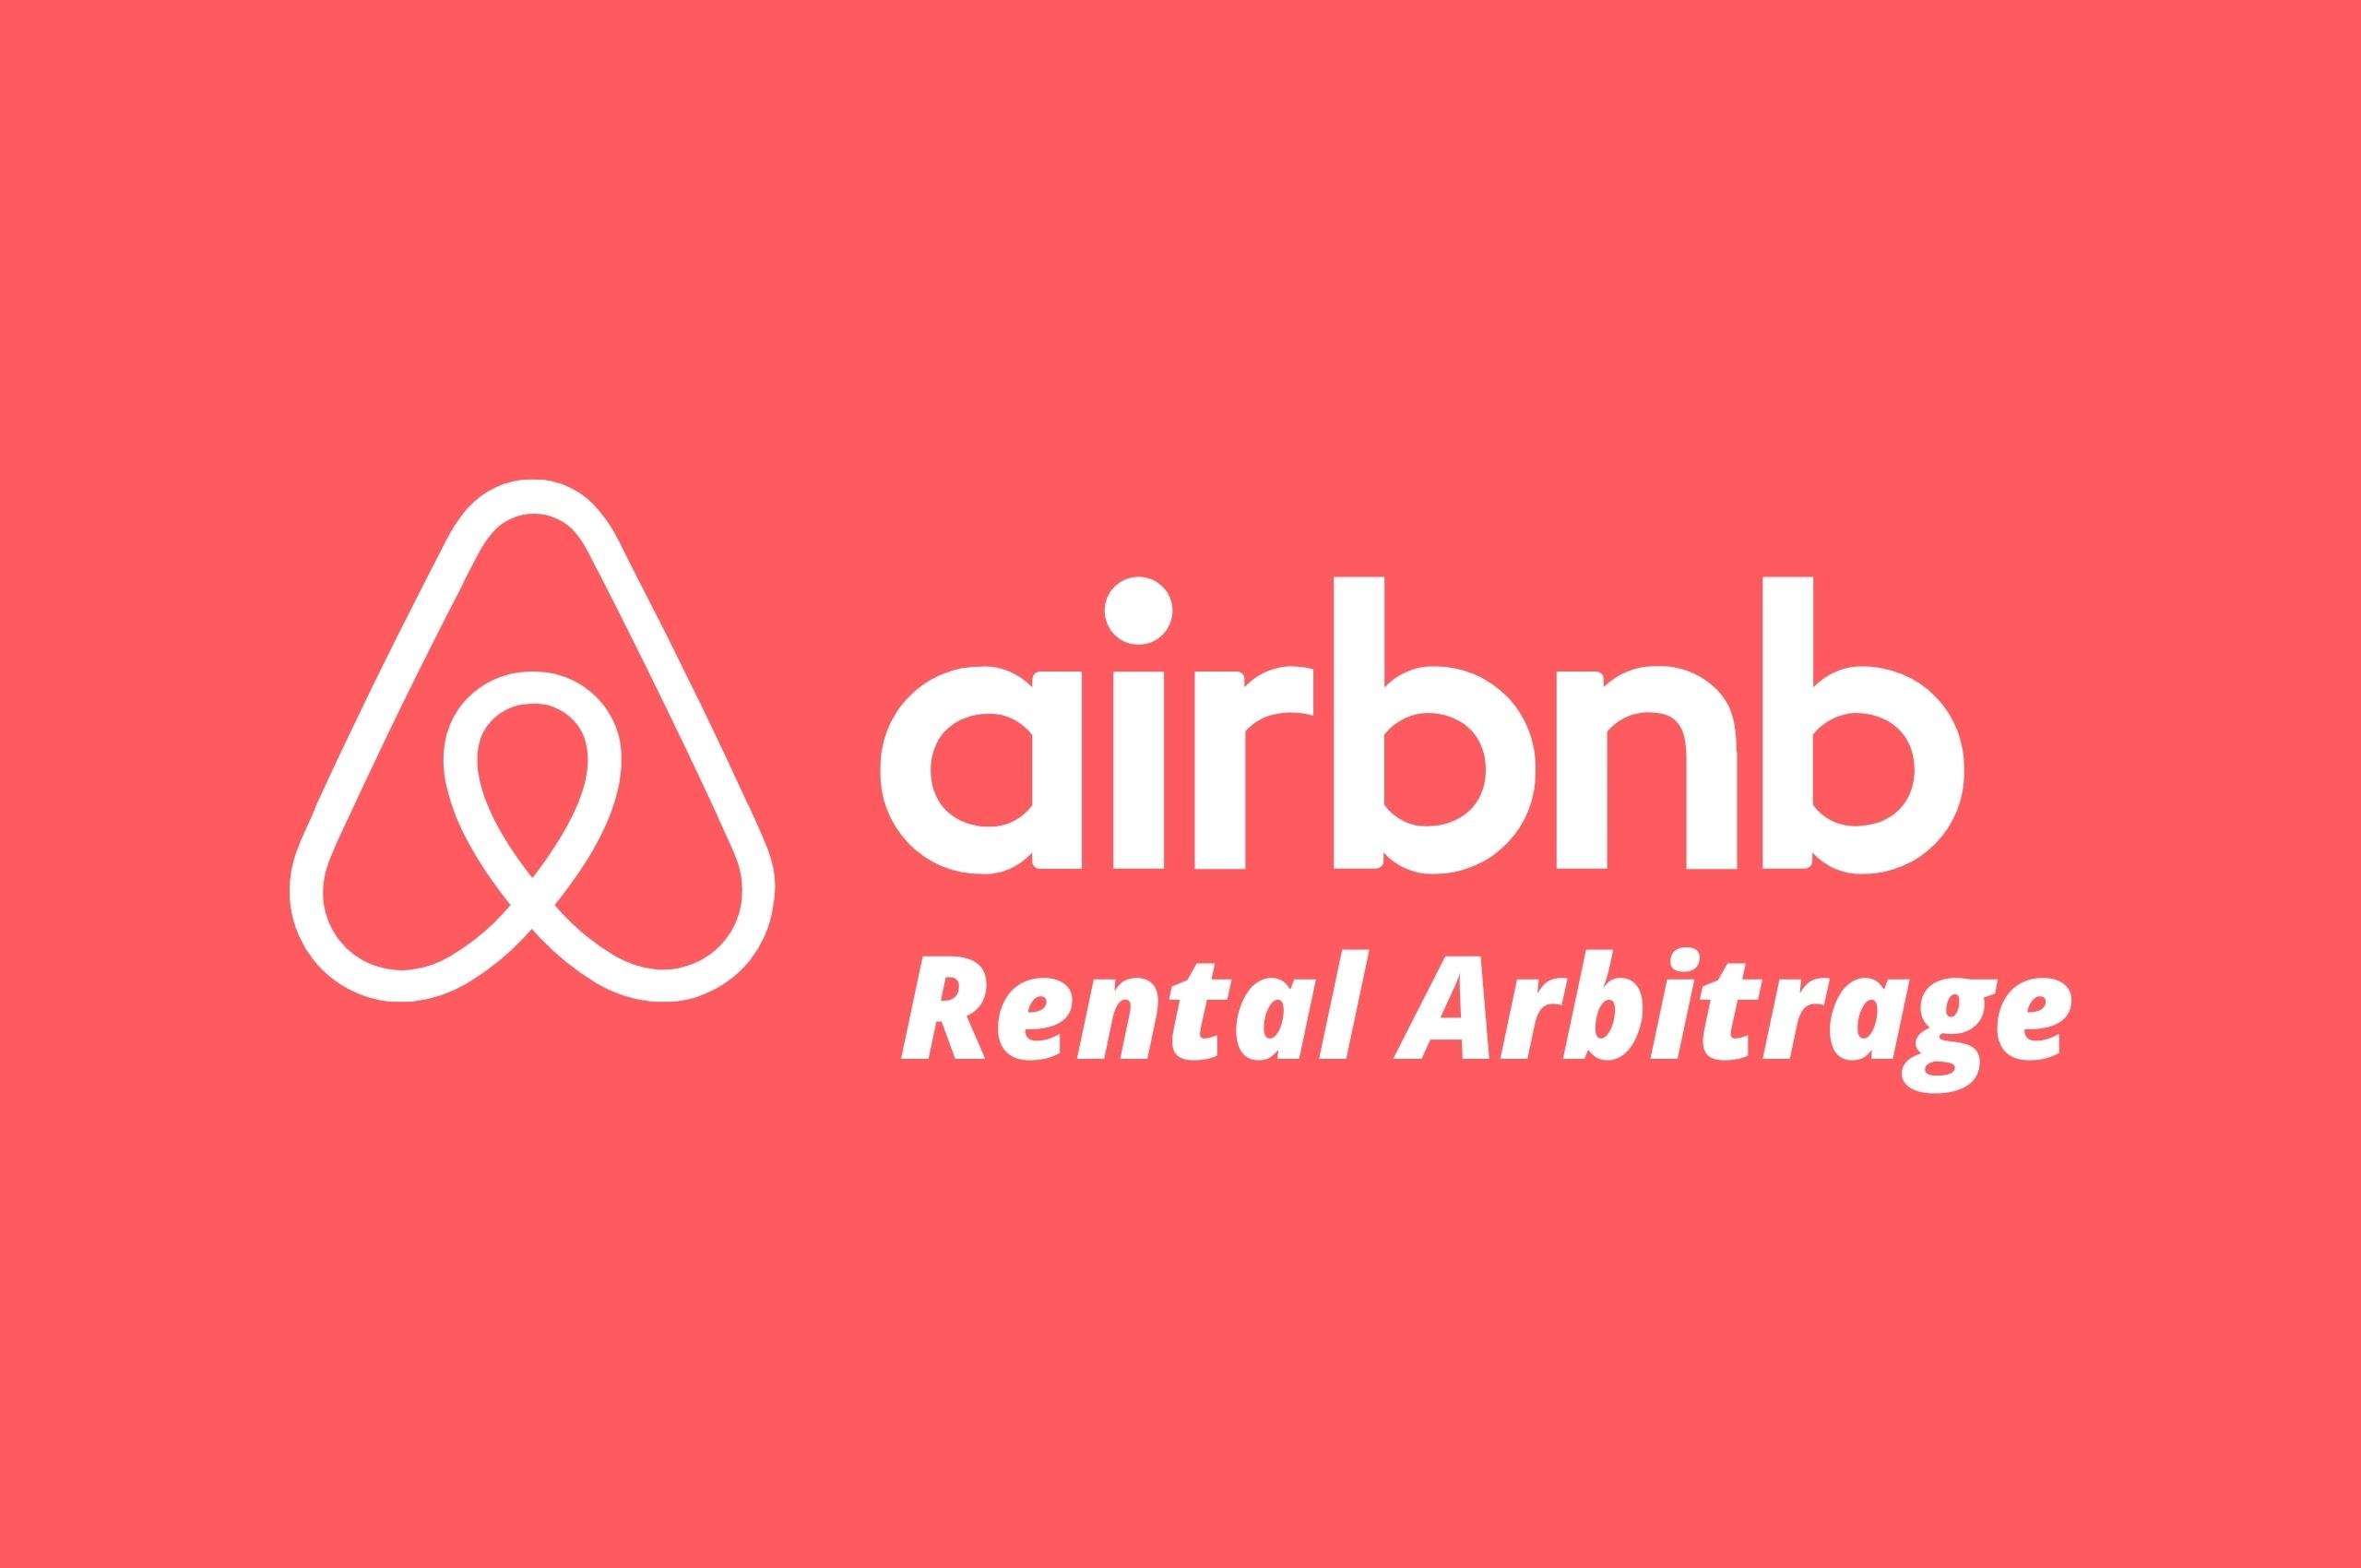 How To Finance An Airbnb Rental Investment